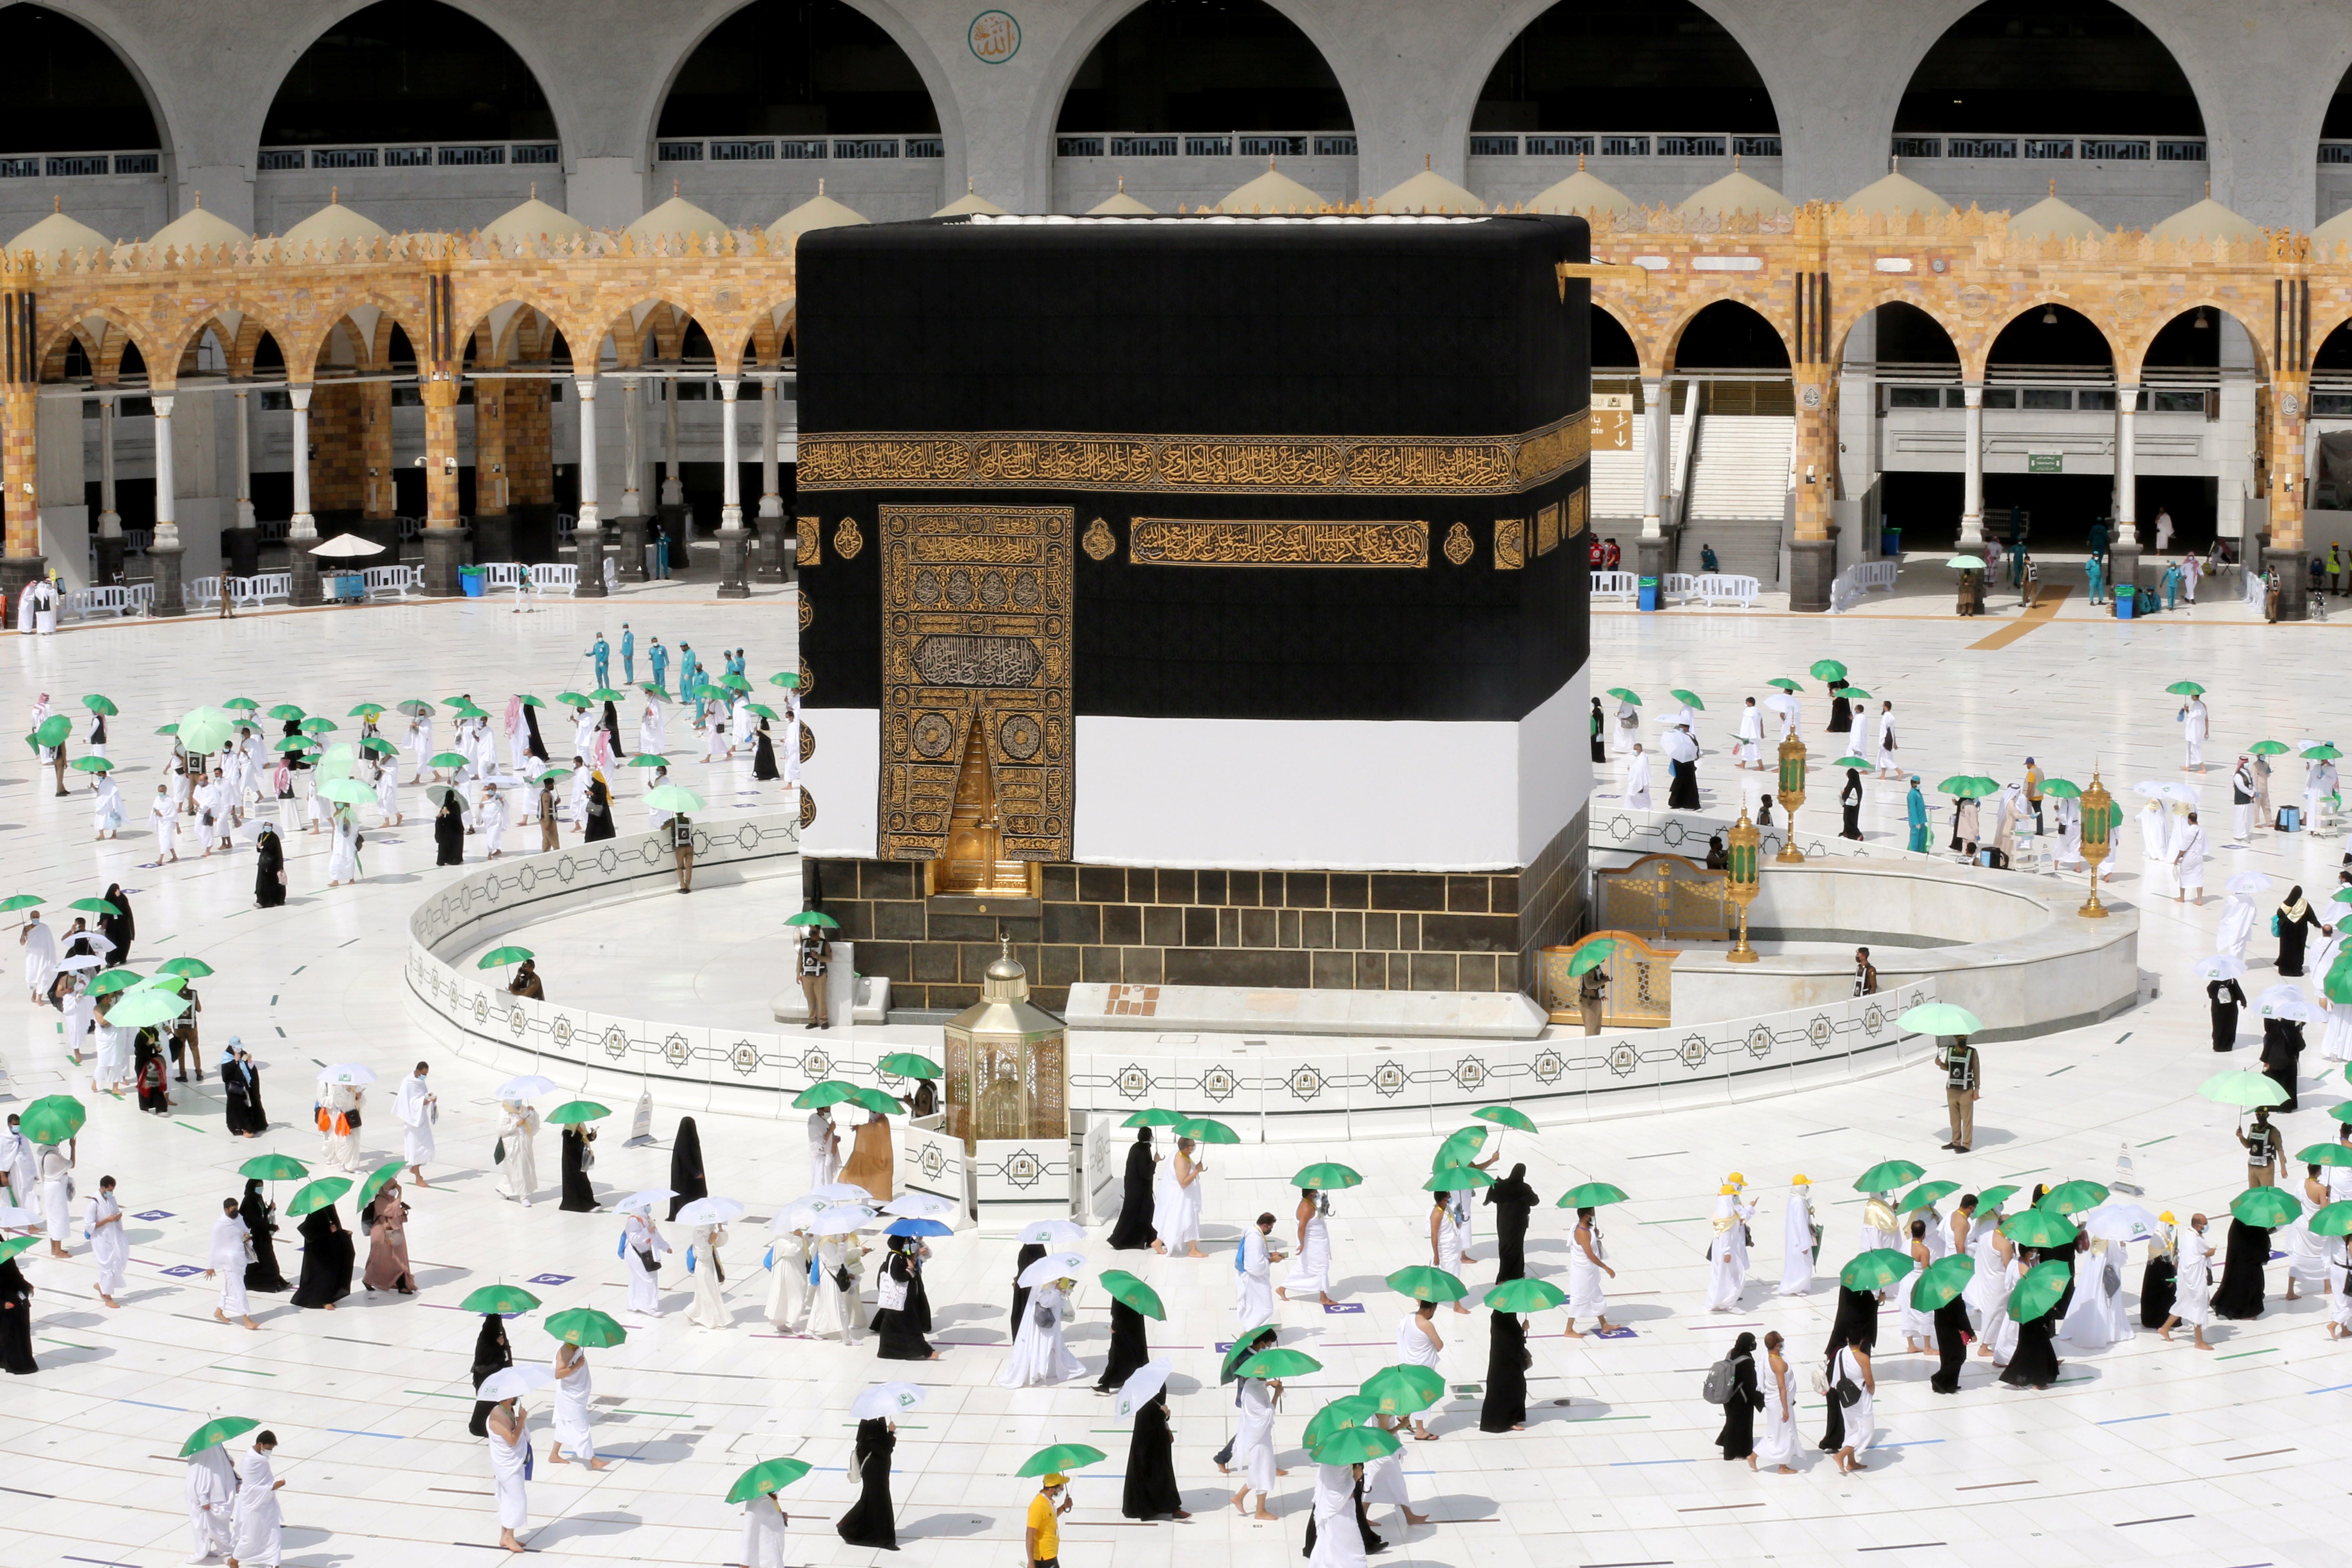 Muslim pilgrims perform Tawaf around Kaaba in the Grand Mosque in the holy city of Mecca, Saudi Arabia July 17, 2021